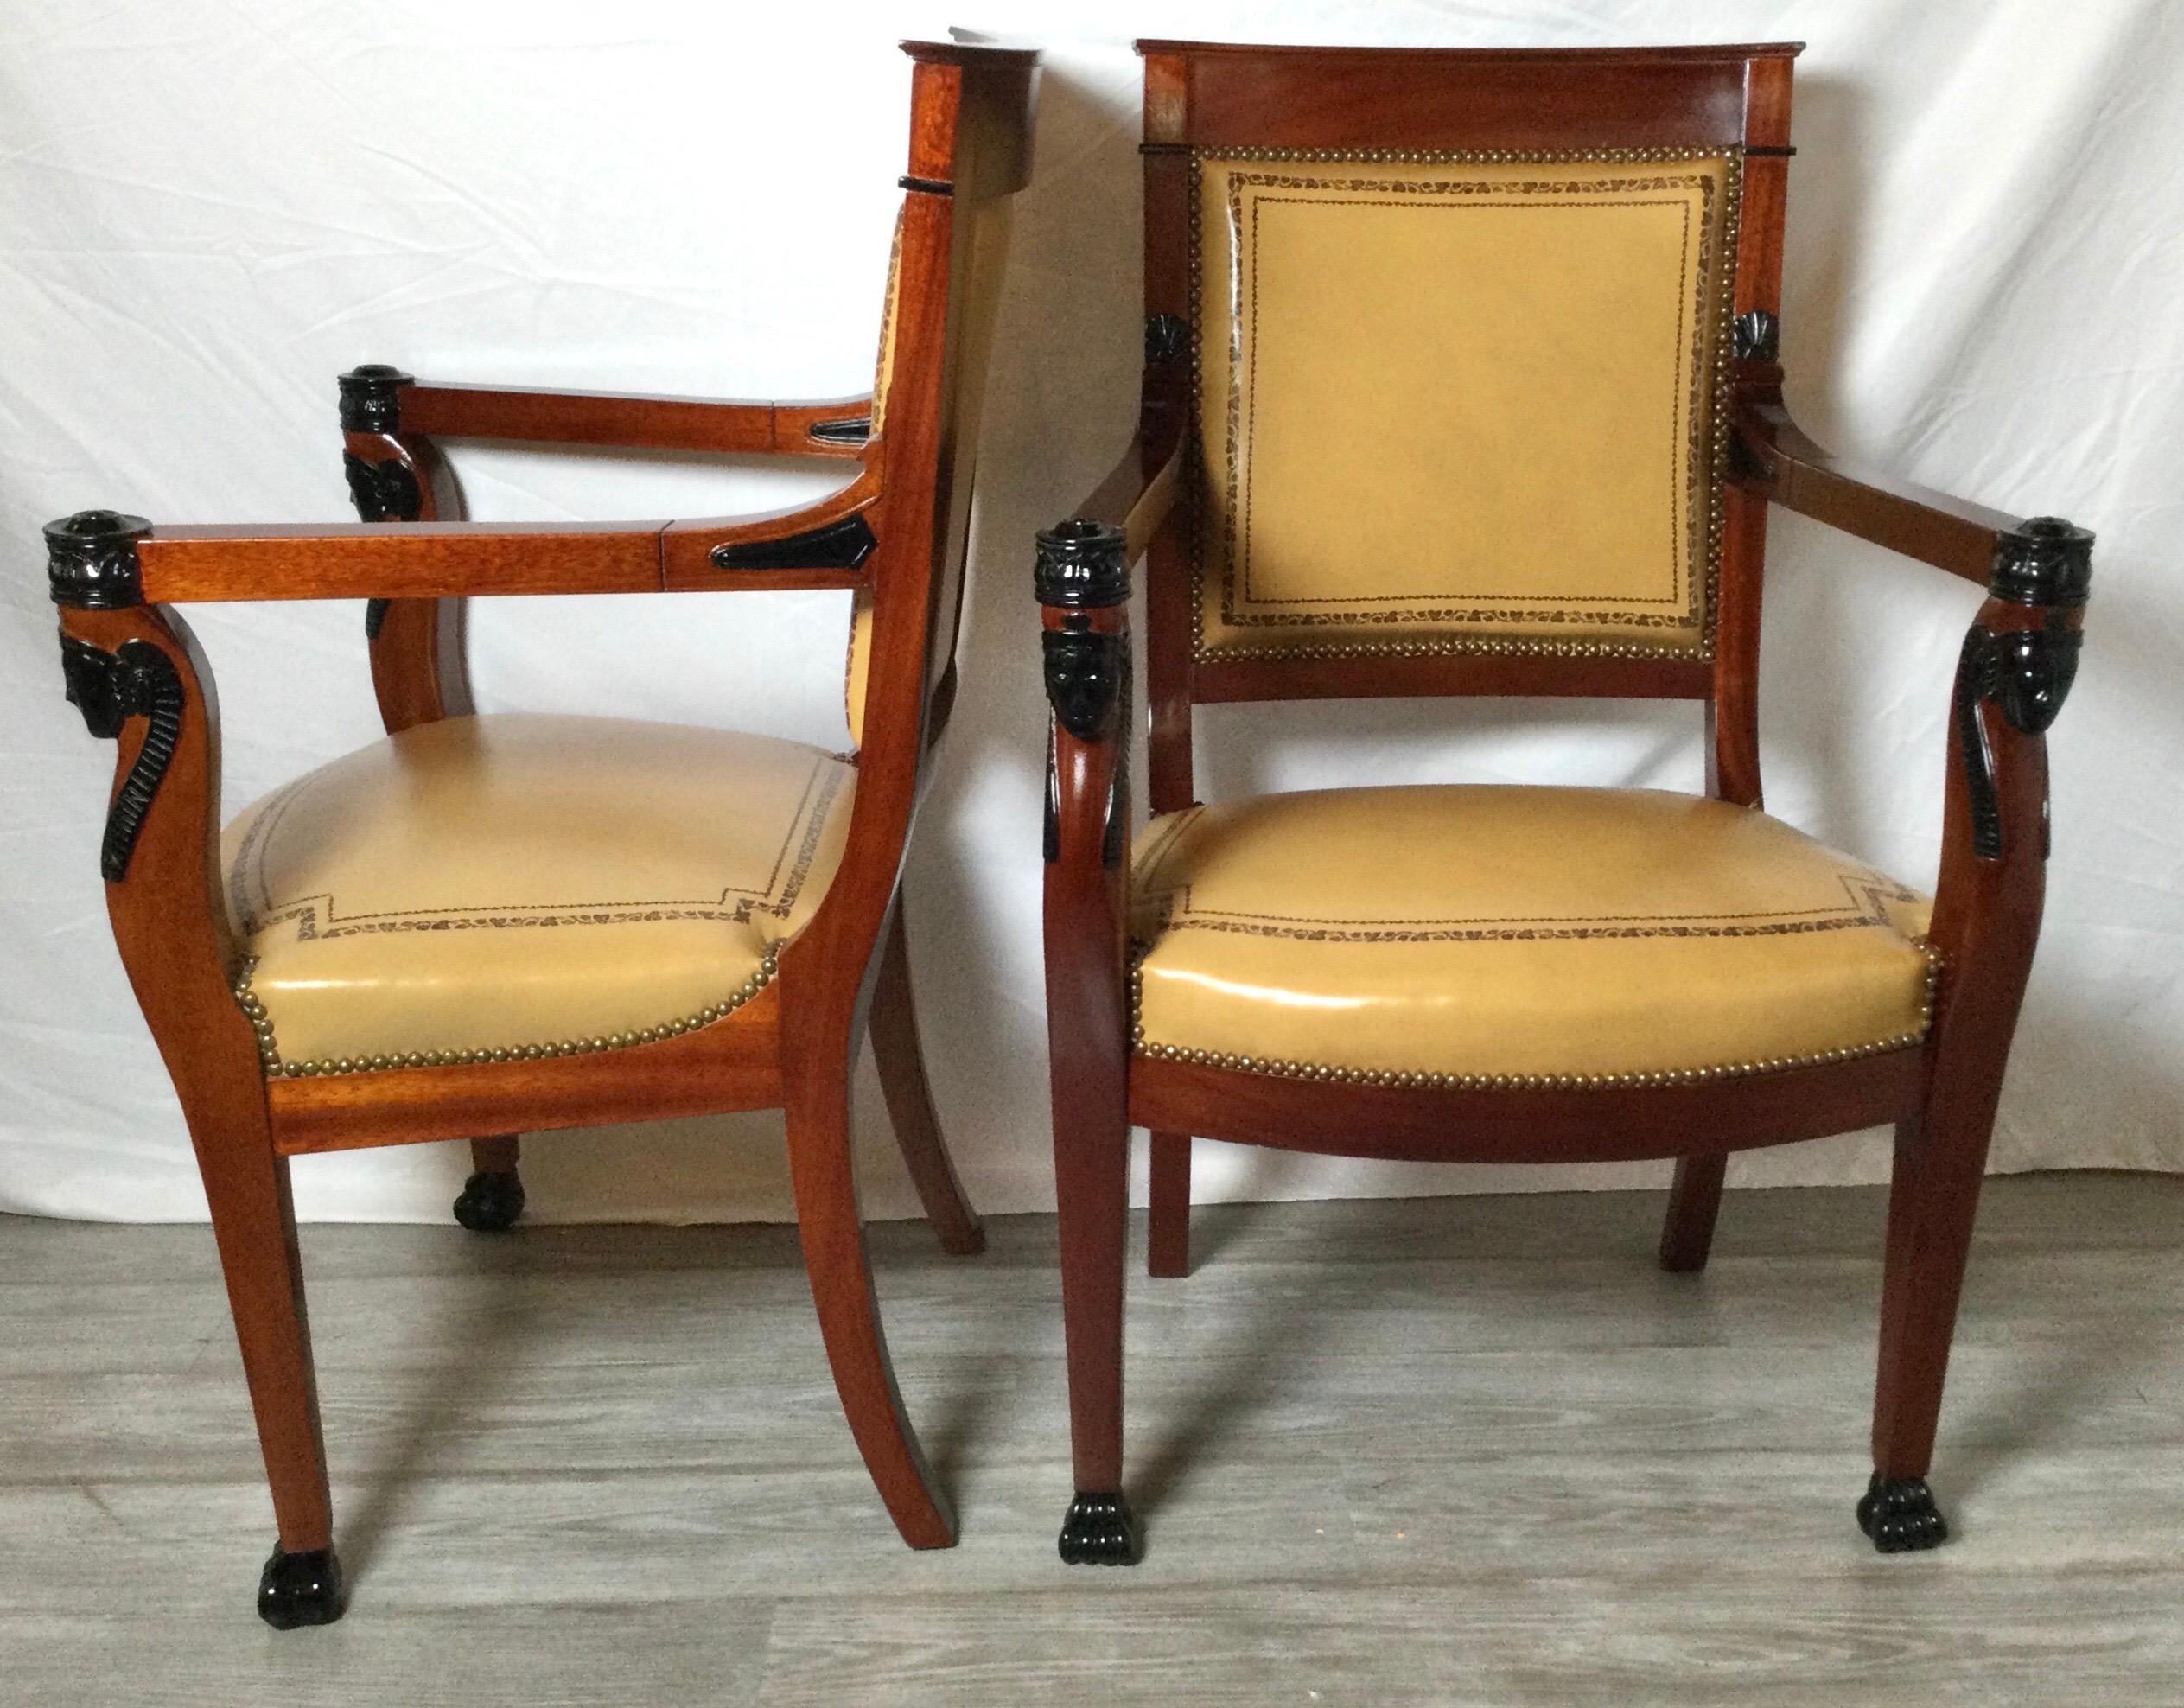 A pair of chic leather and mahogany Egyptian Revival open armchairs. The tan leather seats with tooled gilt trim on the seats and backs. The rich mahogany frames with ebonized wood carve accents.